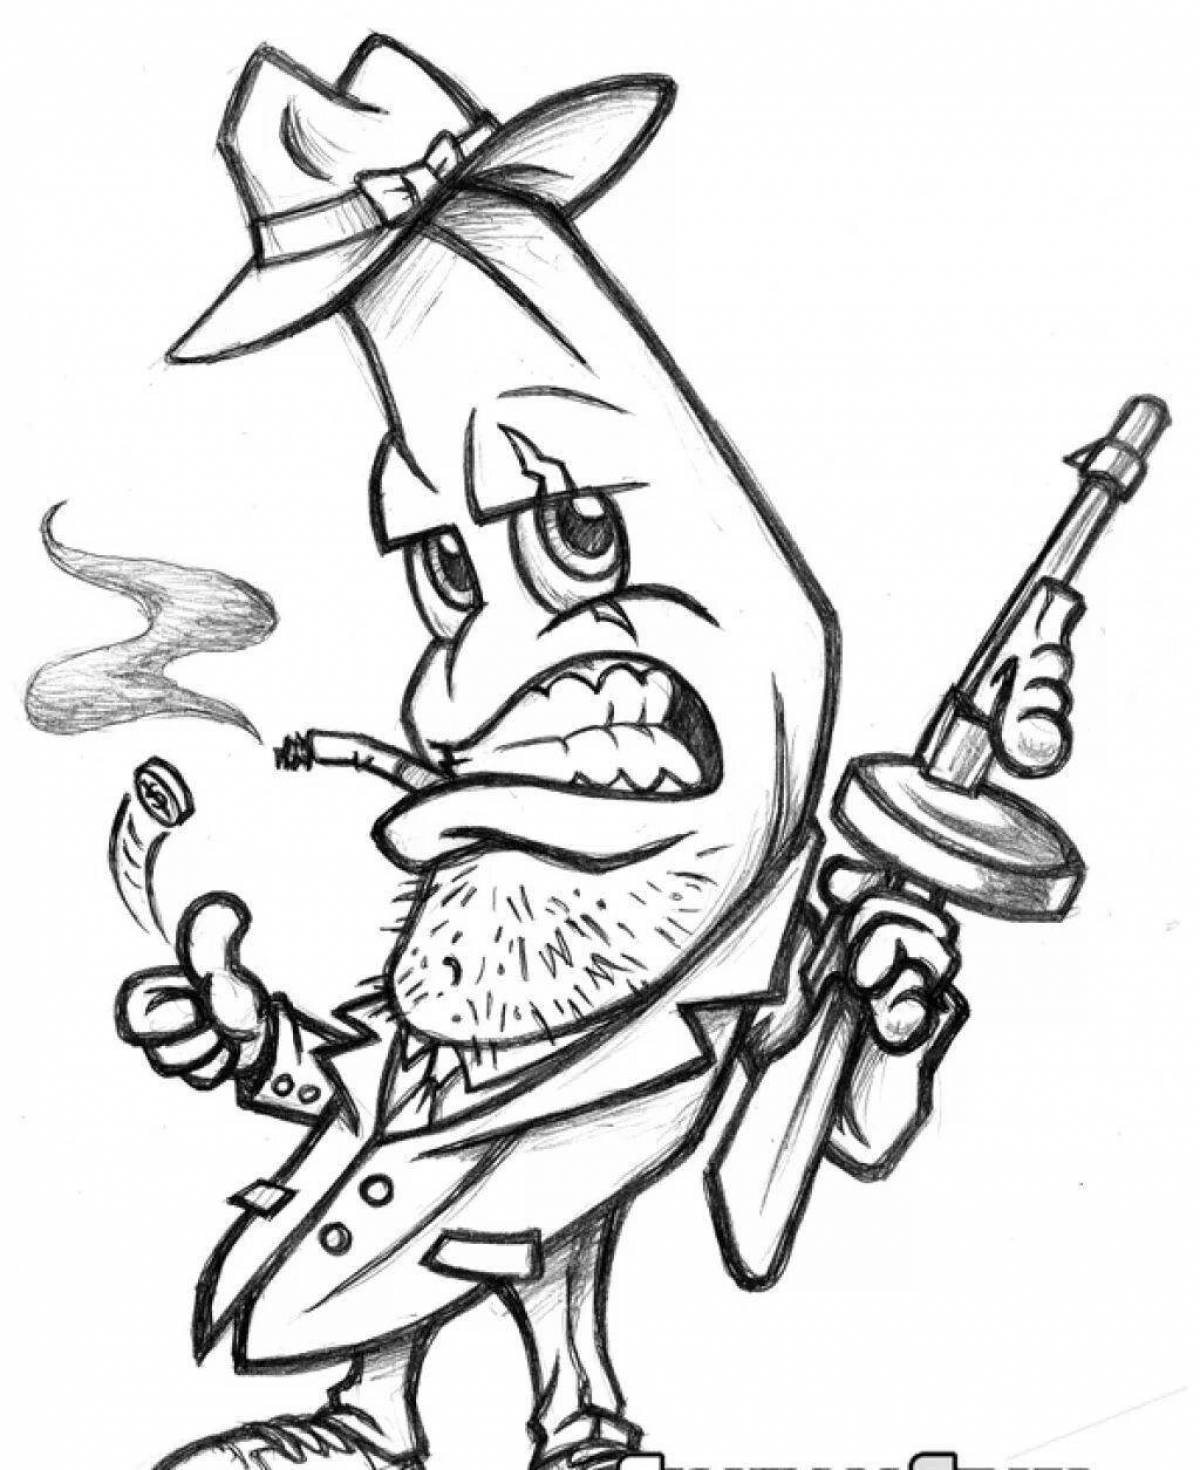 Coloring page of a daring gangster